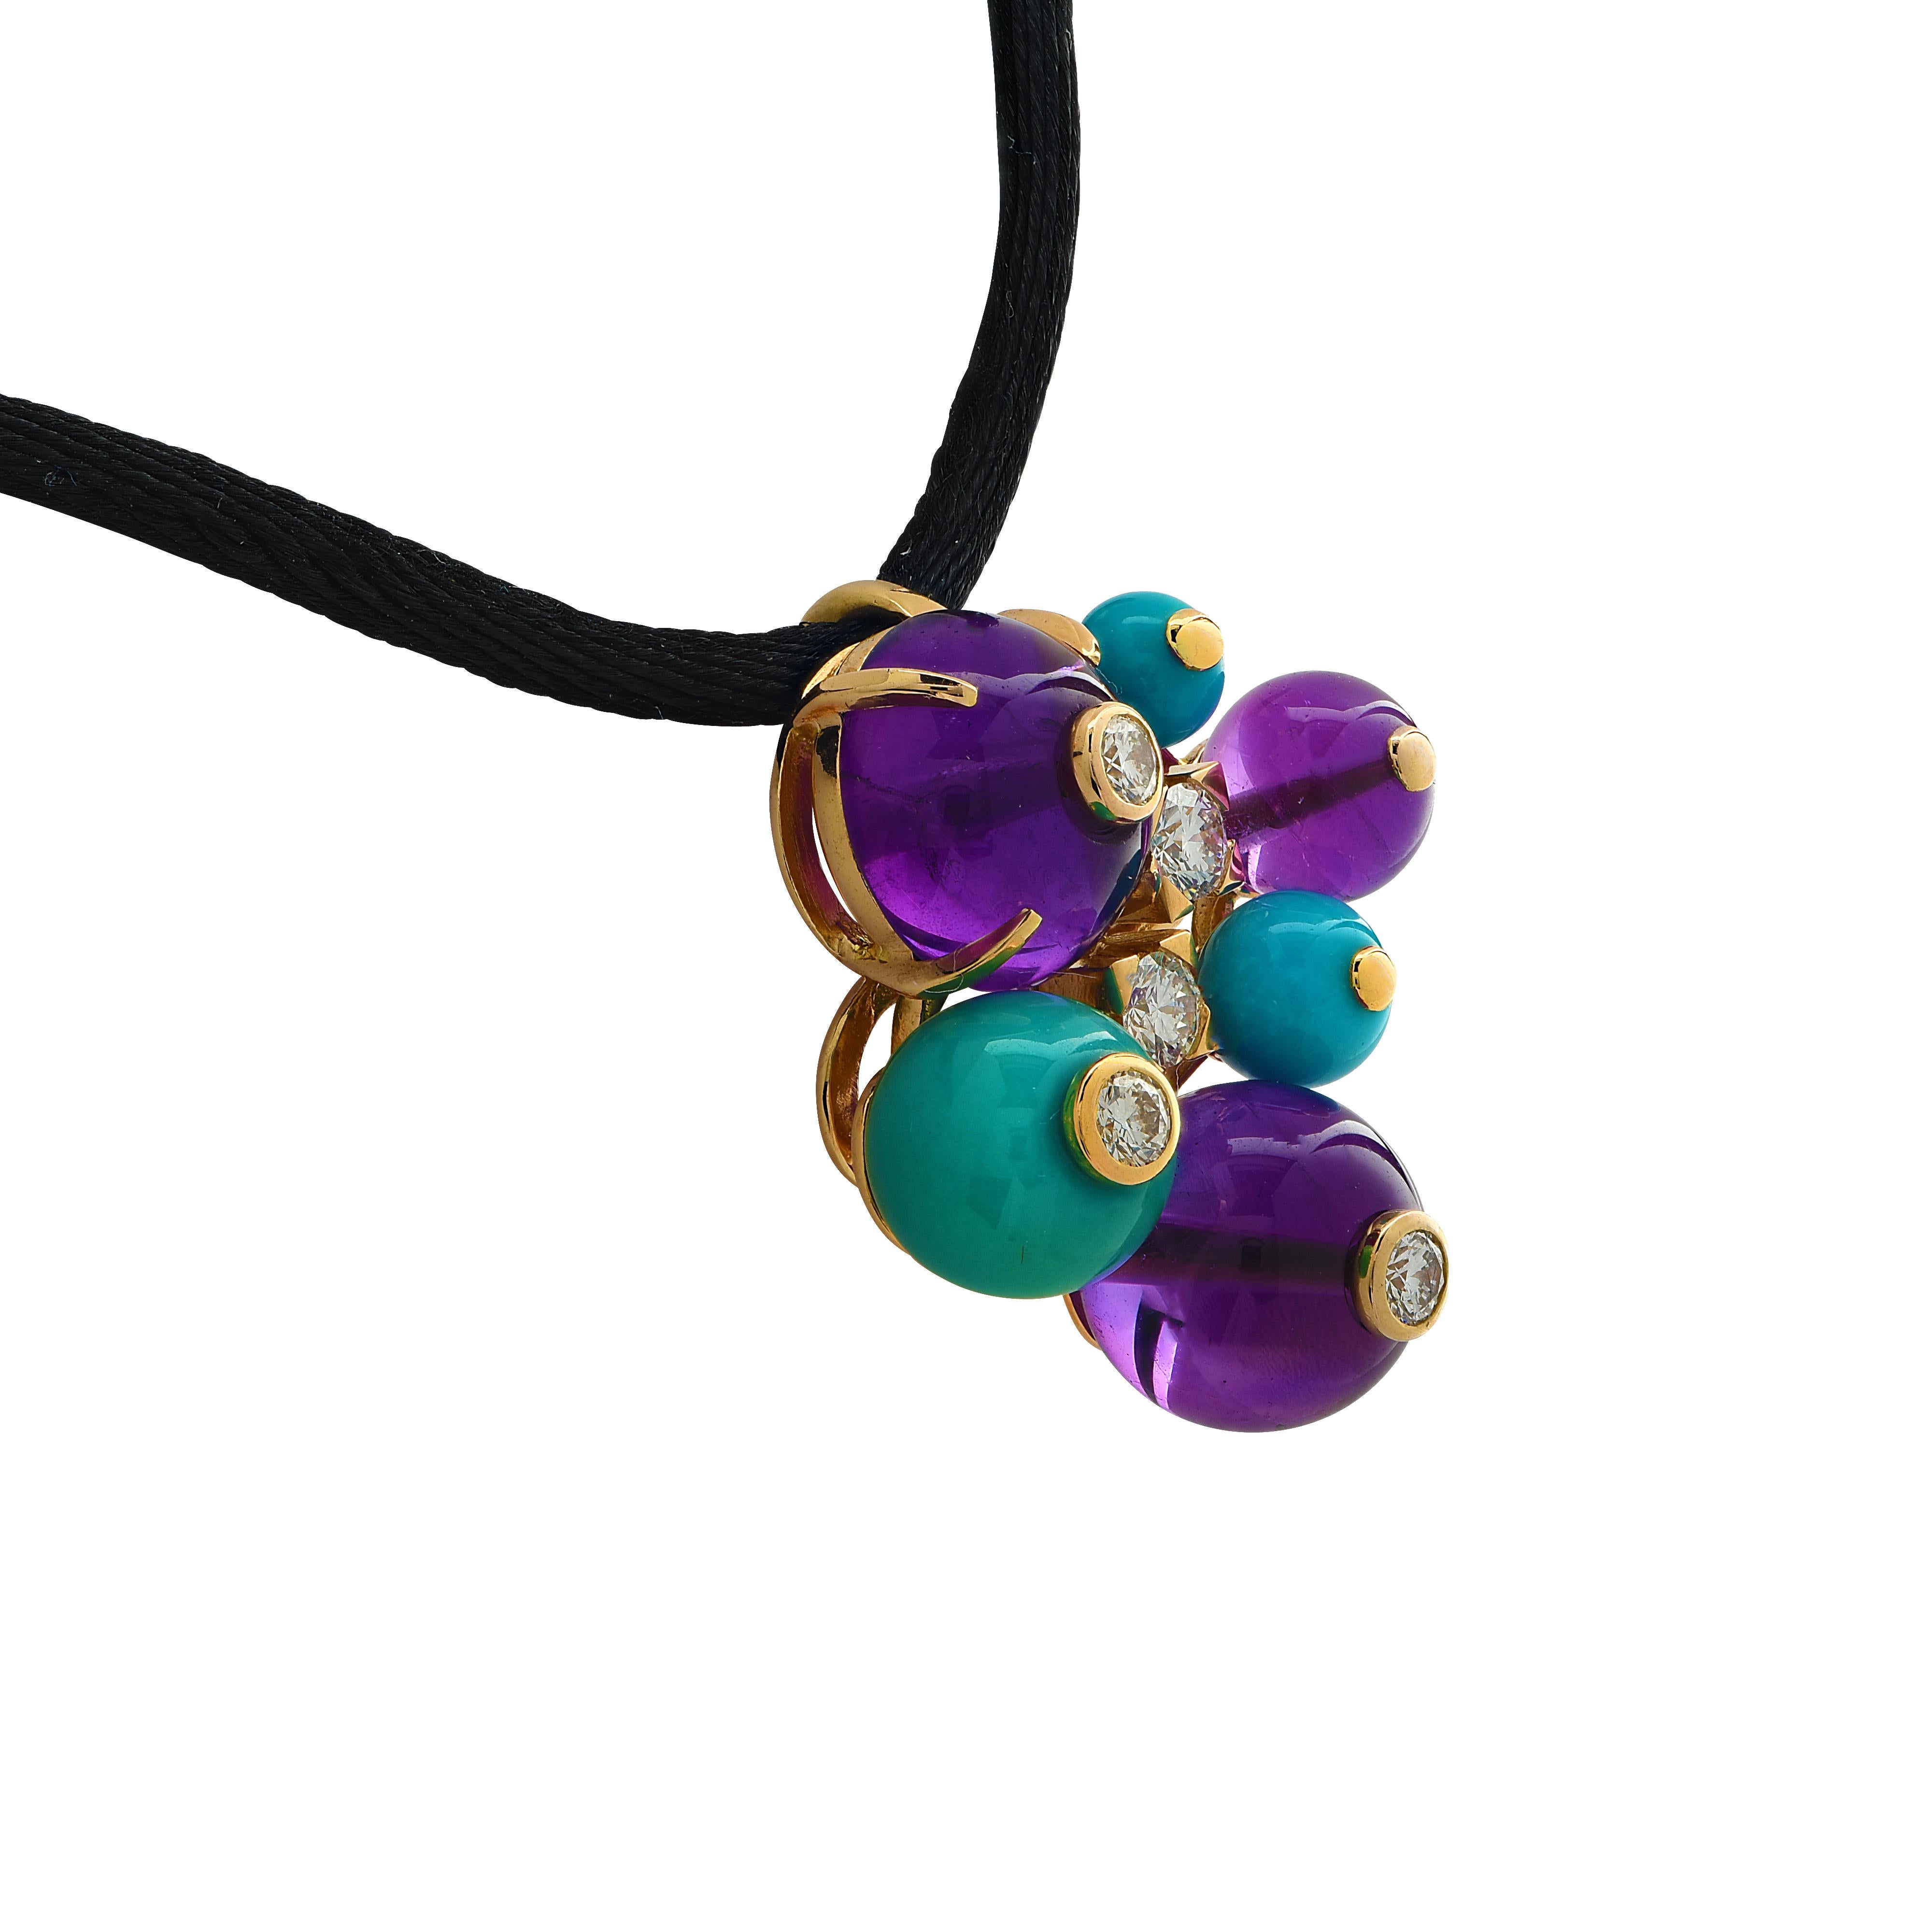 Enchanting Delices De Goa Pendant from the iconic House of Cartier, finely crafted in 18 yellow gold,  featuring a cluster of 3 amethyst beads and three turquoise beads varying in size, adorned with 5 round brilliant cut diamonds weighing